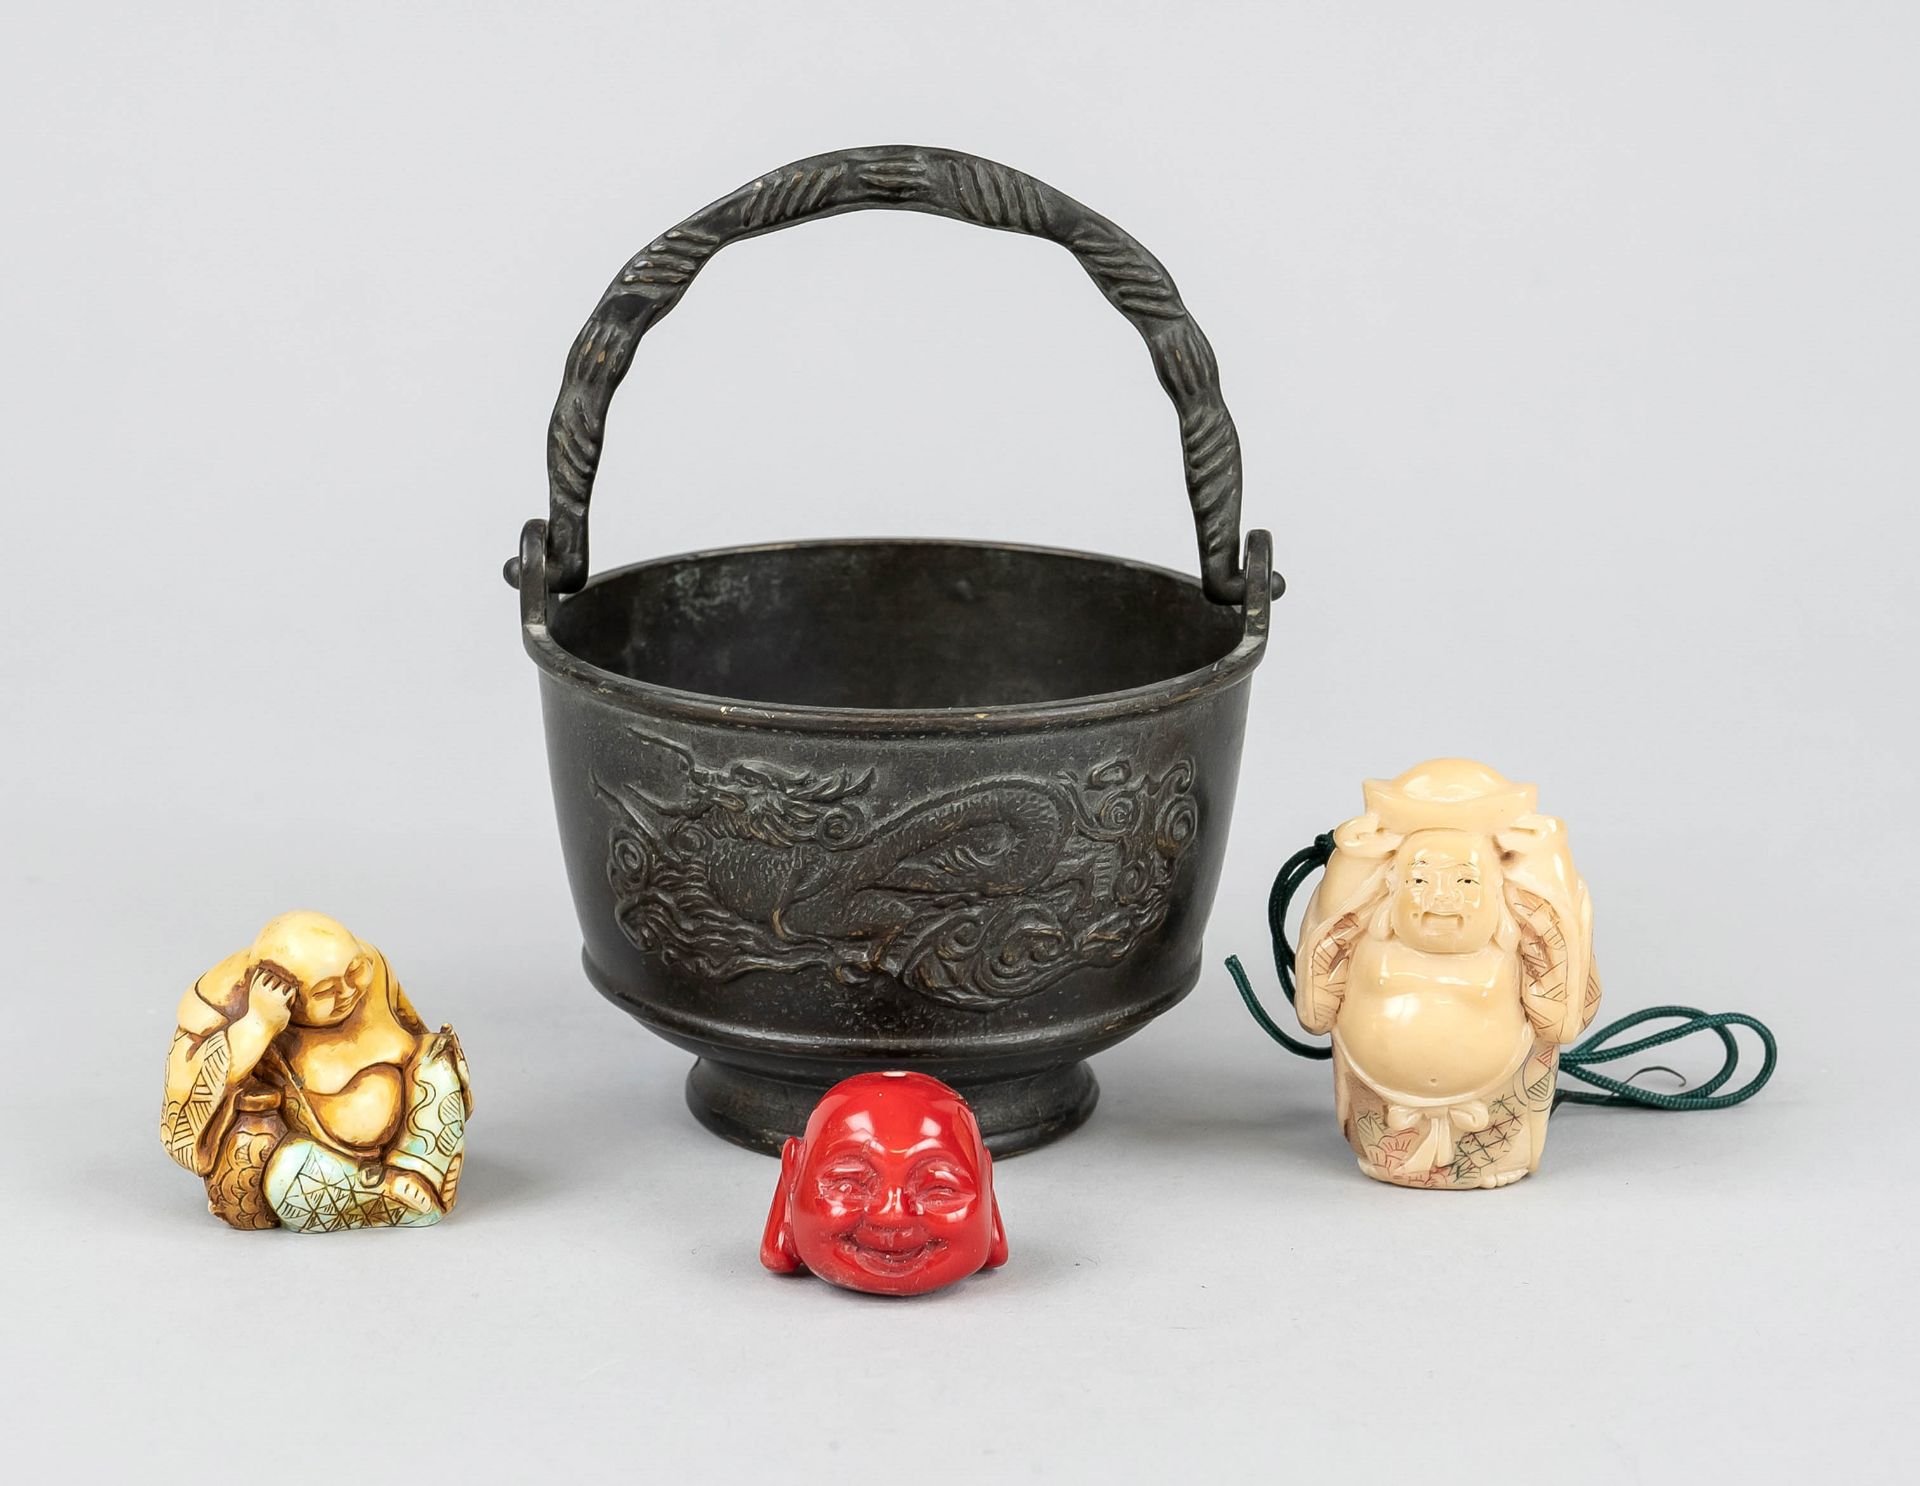 3 fat sack buddhas in handle pot, China, 20th c., metal cast dragon pot contains 2 netsuke budai and